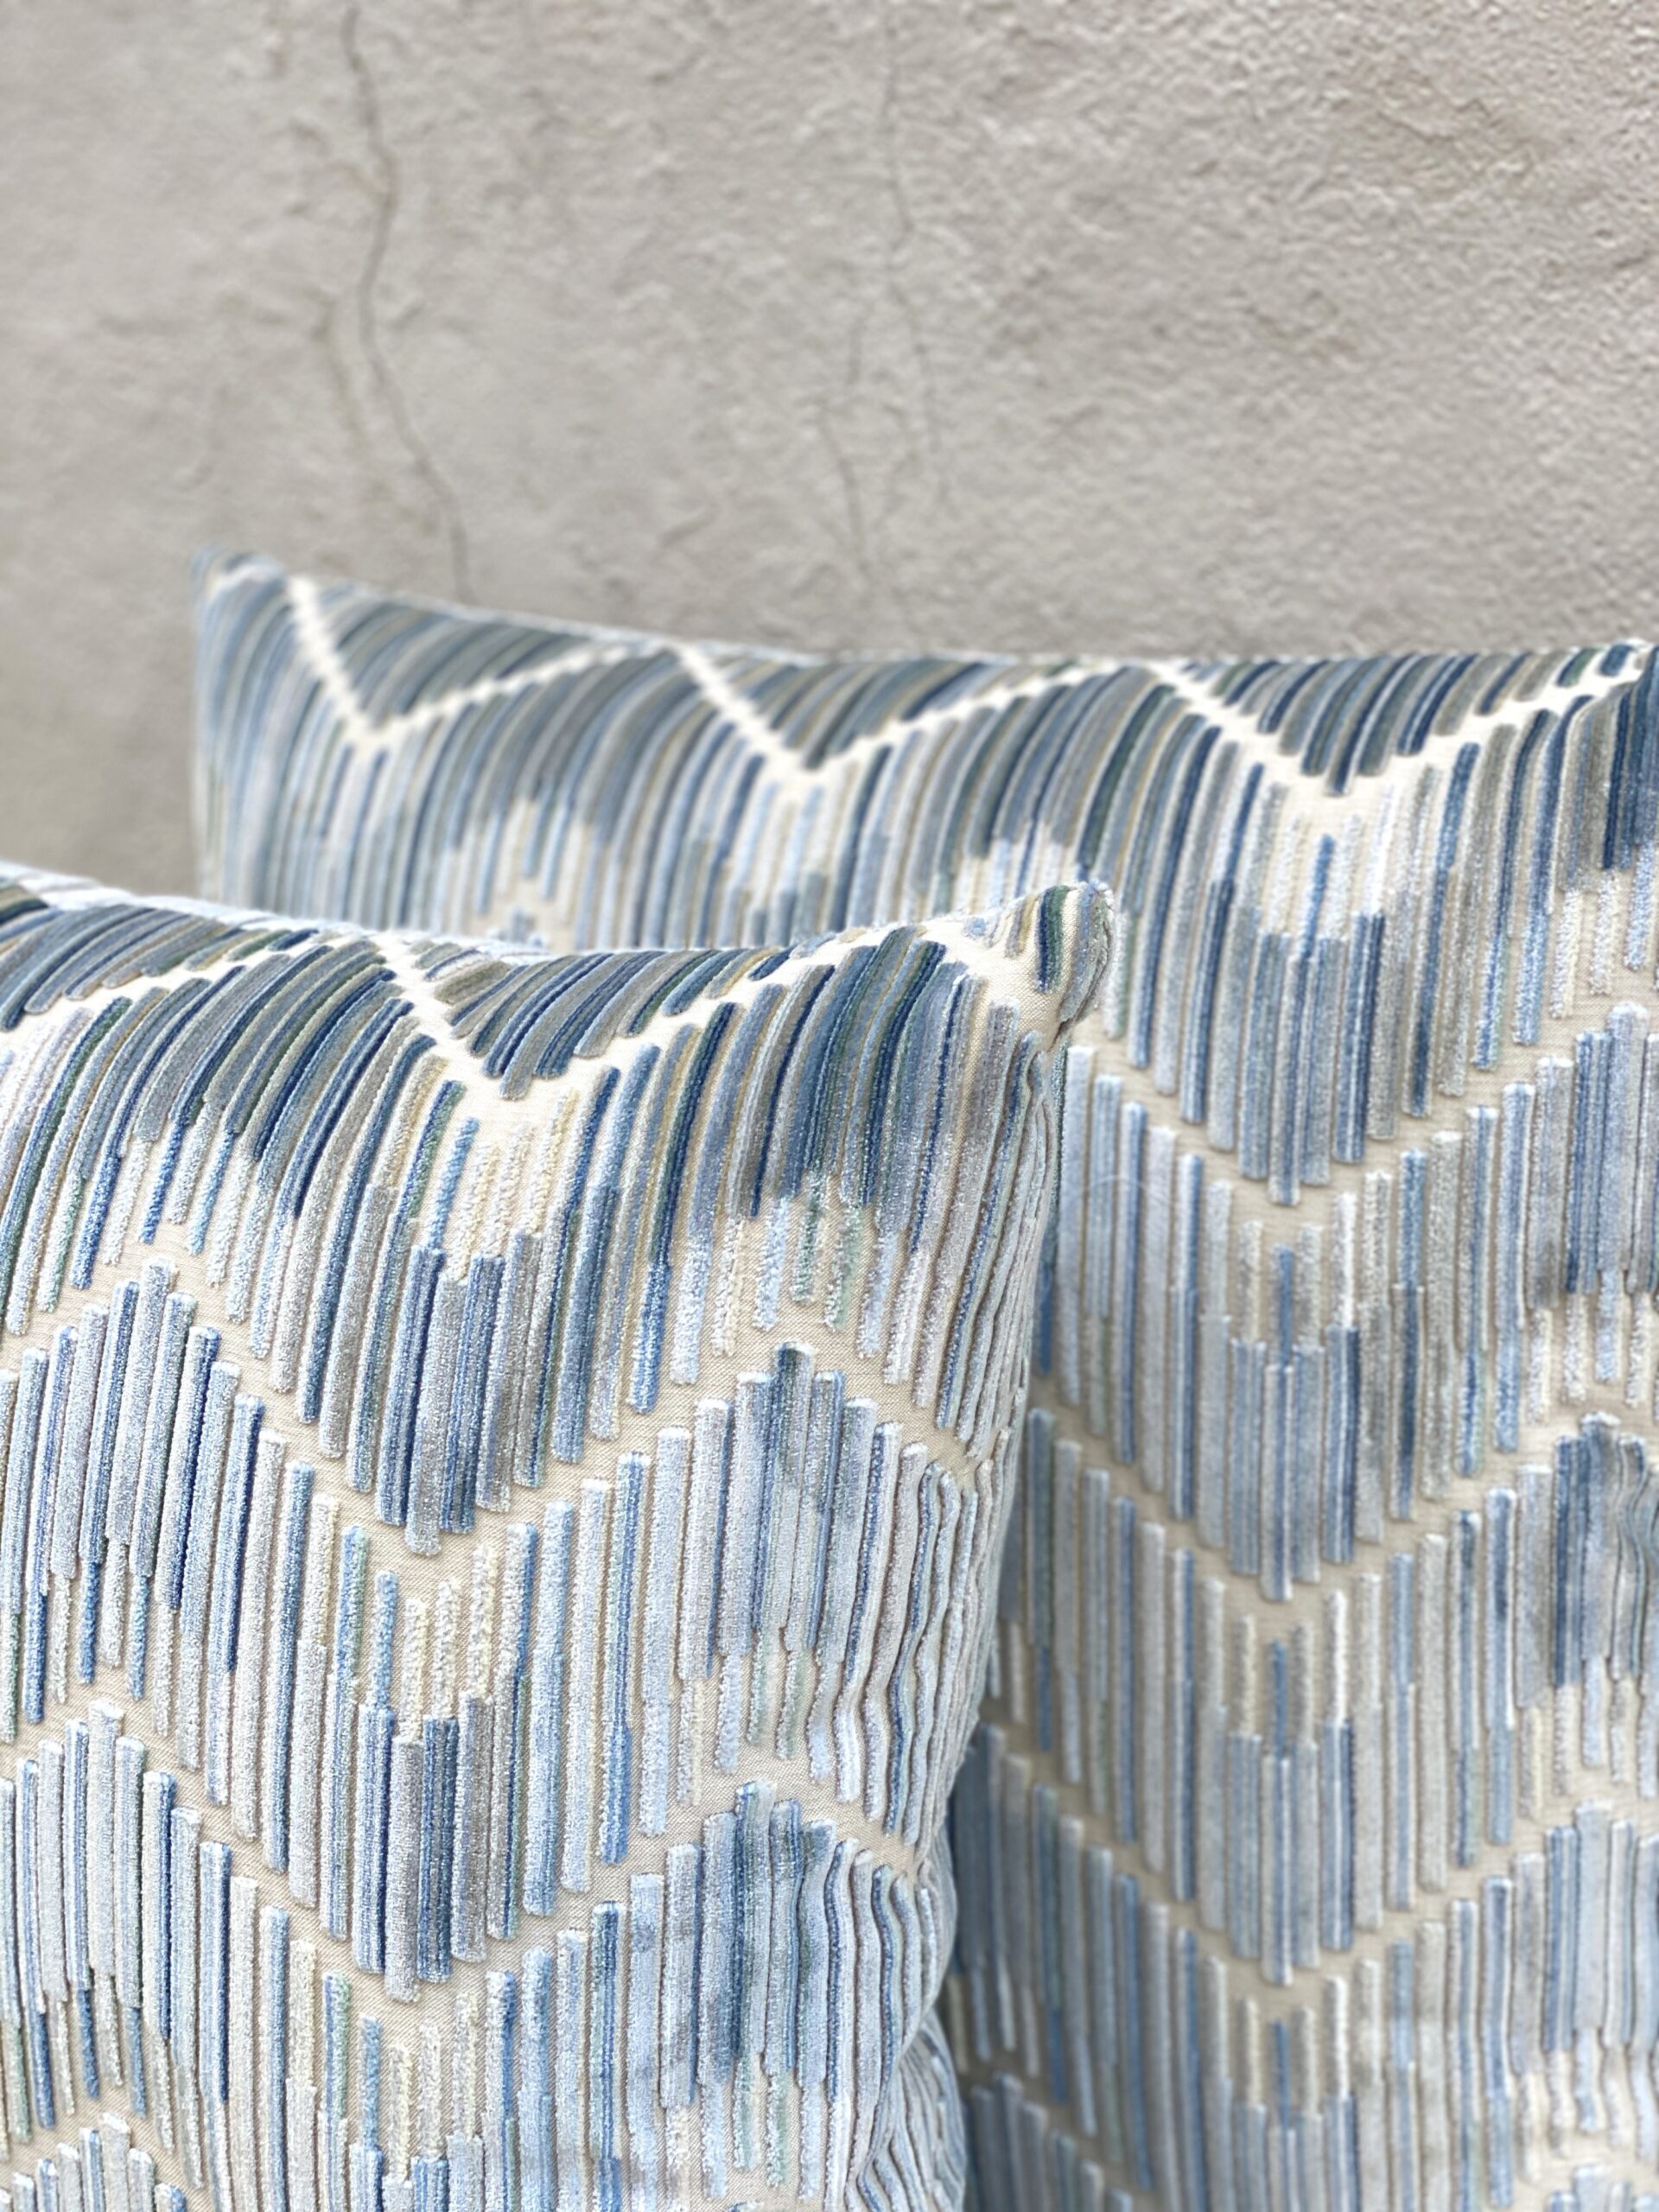 Kravet Highs and Lows Pillows